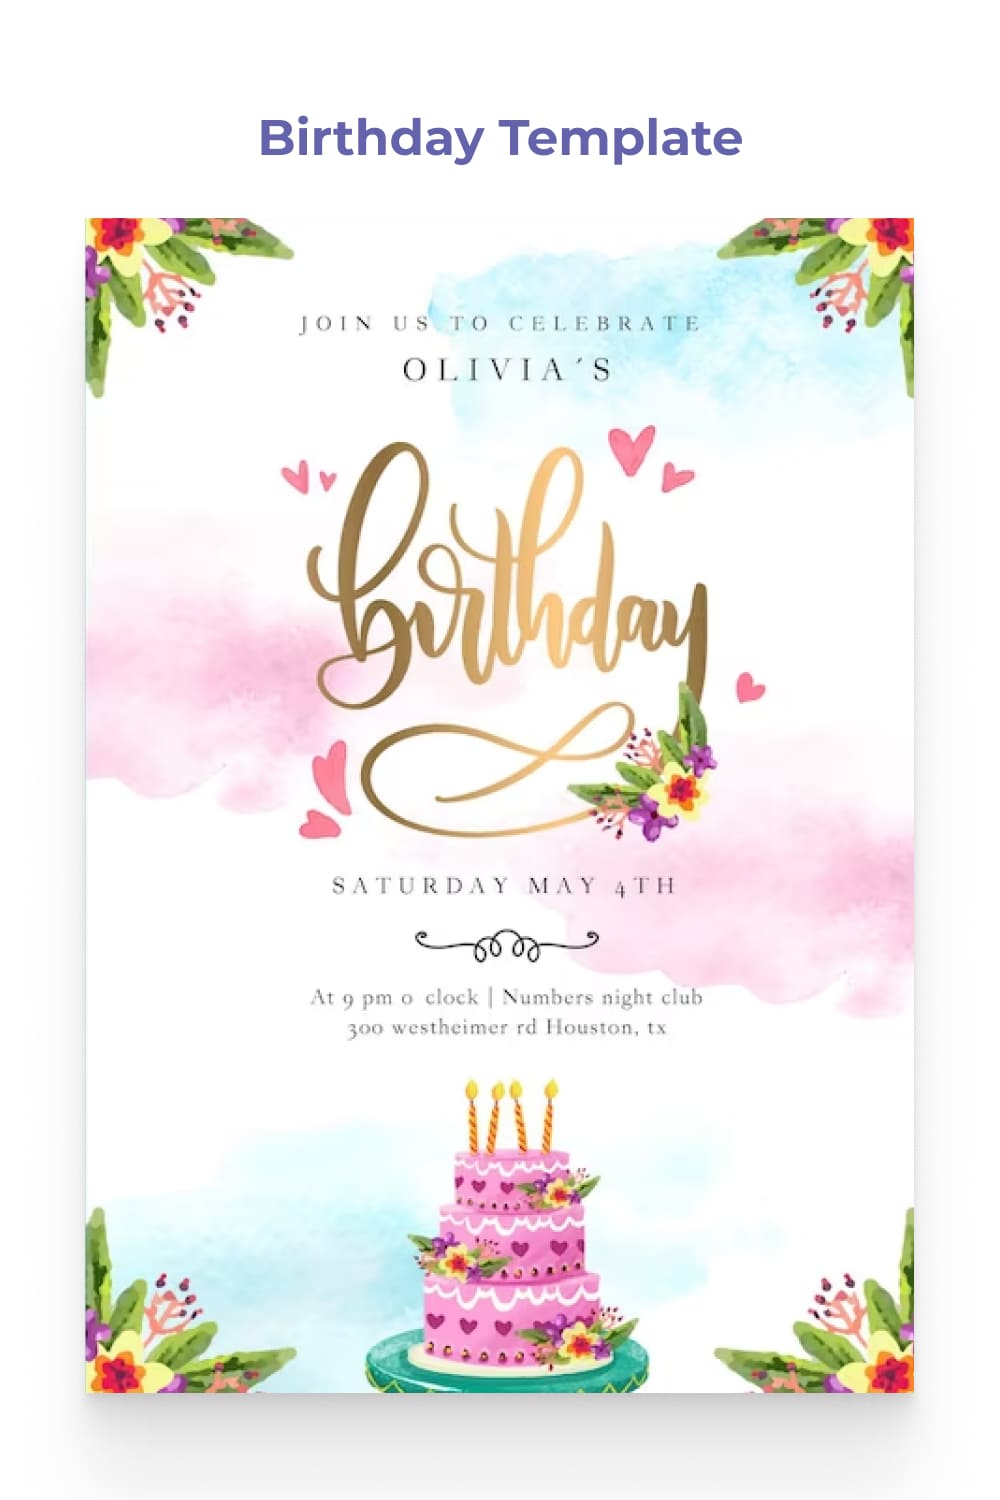 Birthday invitation with cake pattern and pink clouds.